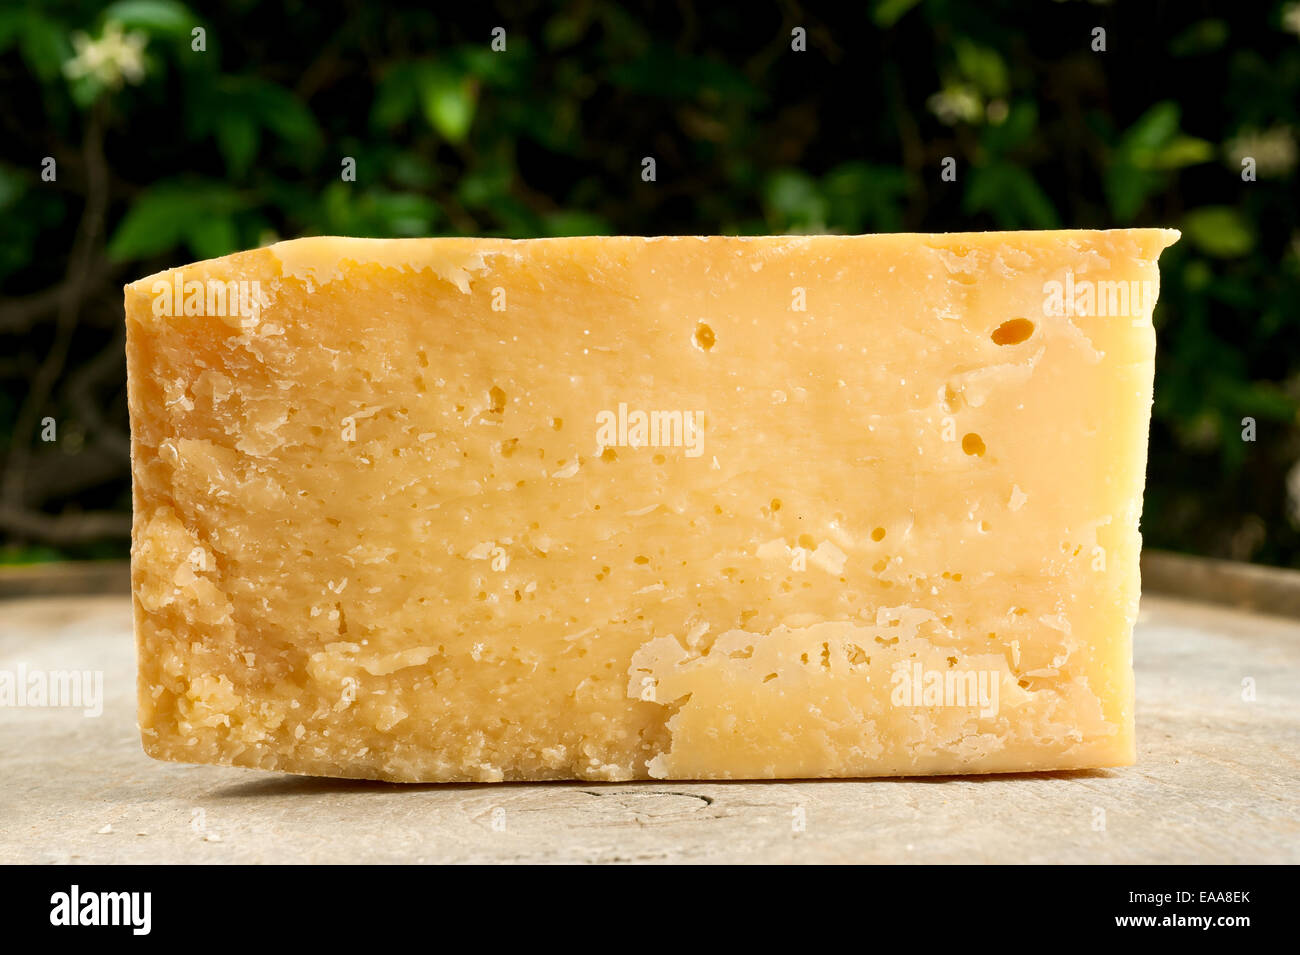 slice of aged cheese Stock Photo